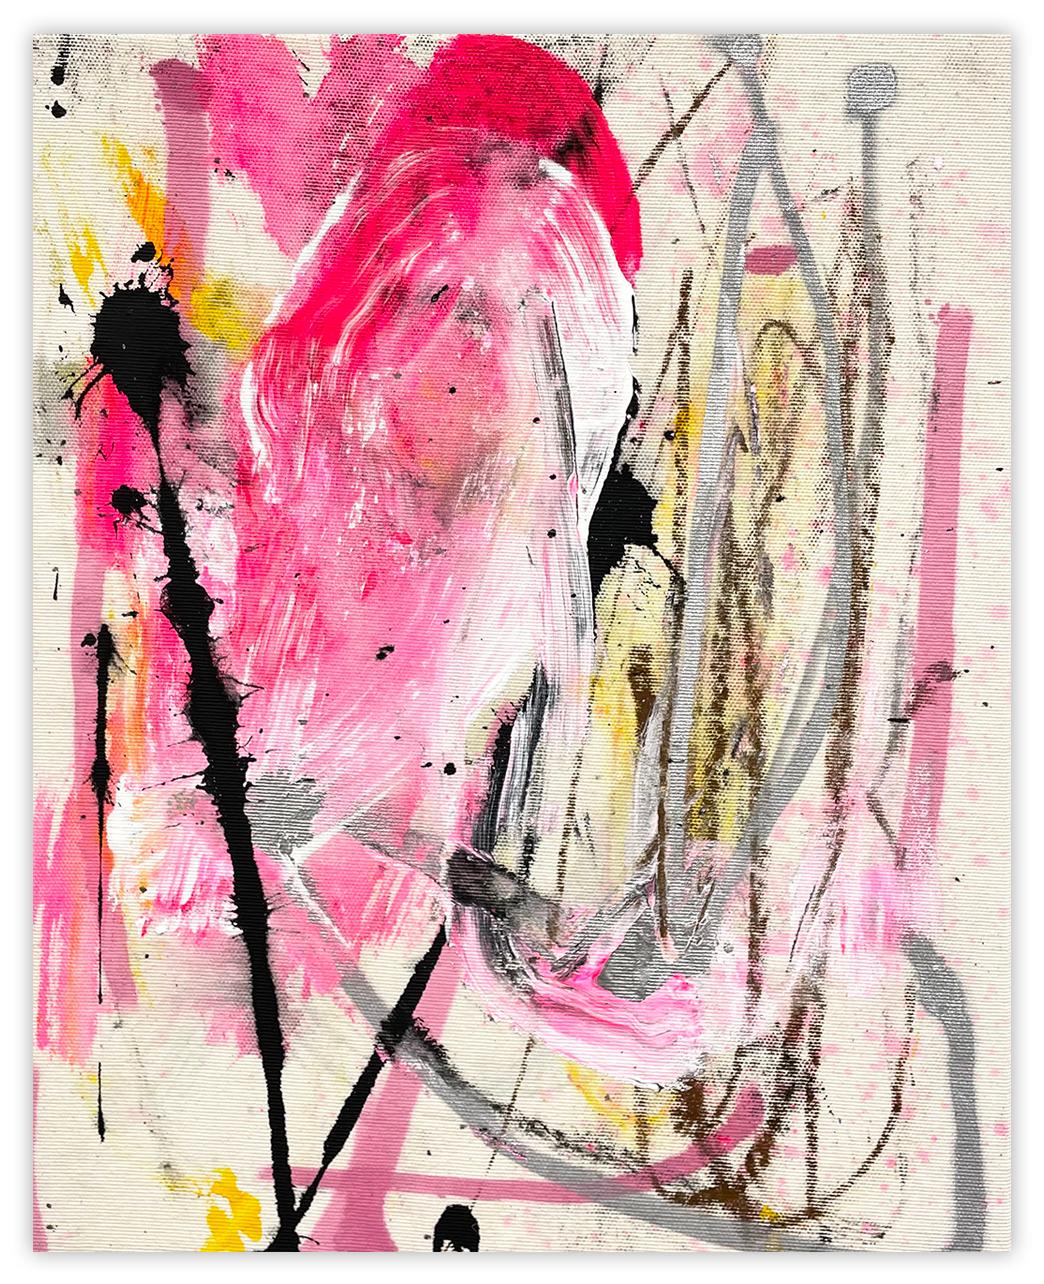 Slightly Tart (Abstract Painting)
Mixed Media on Canvas — Unframed.

Ludovic Dervillez is a French abstract painter. His work explores the amalgamation of spontaneity, materiality, and emotion through a visual display of color and dynamic gestures.